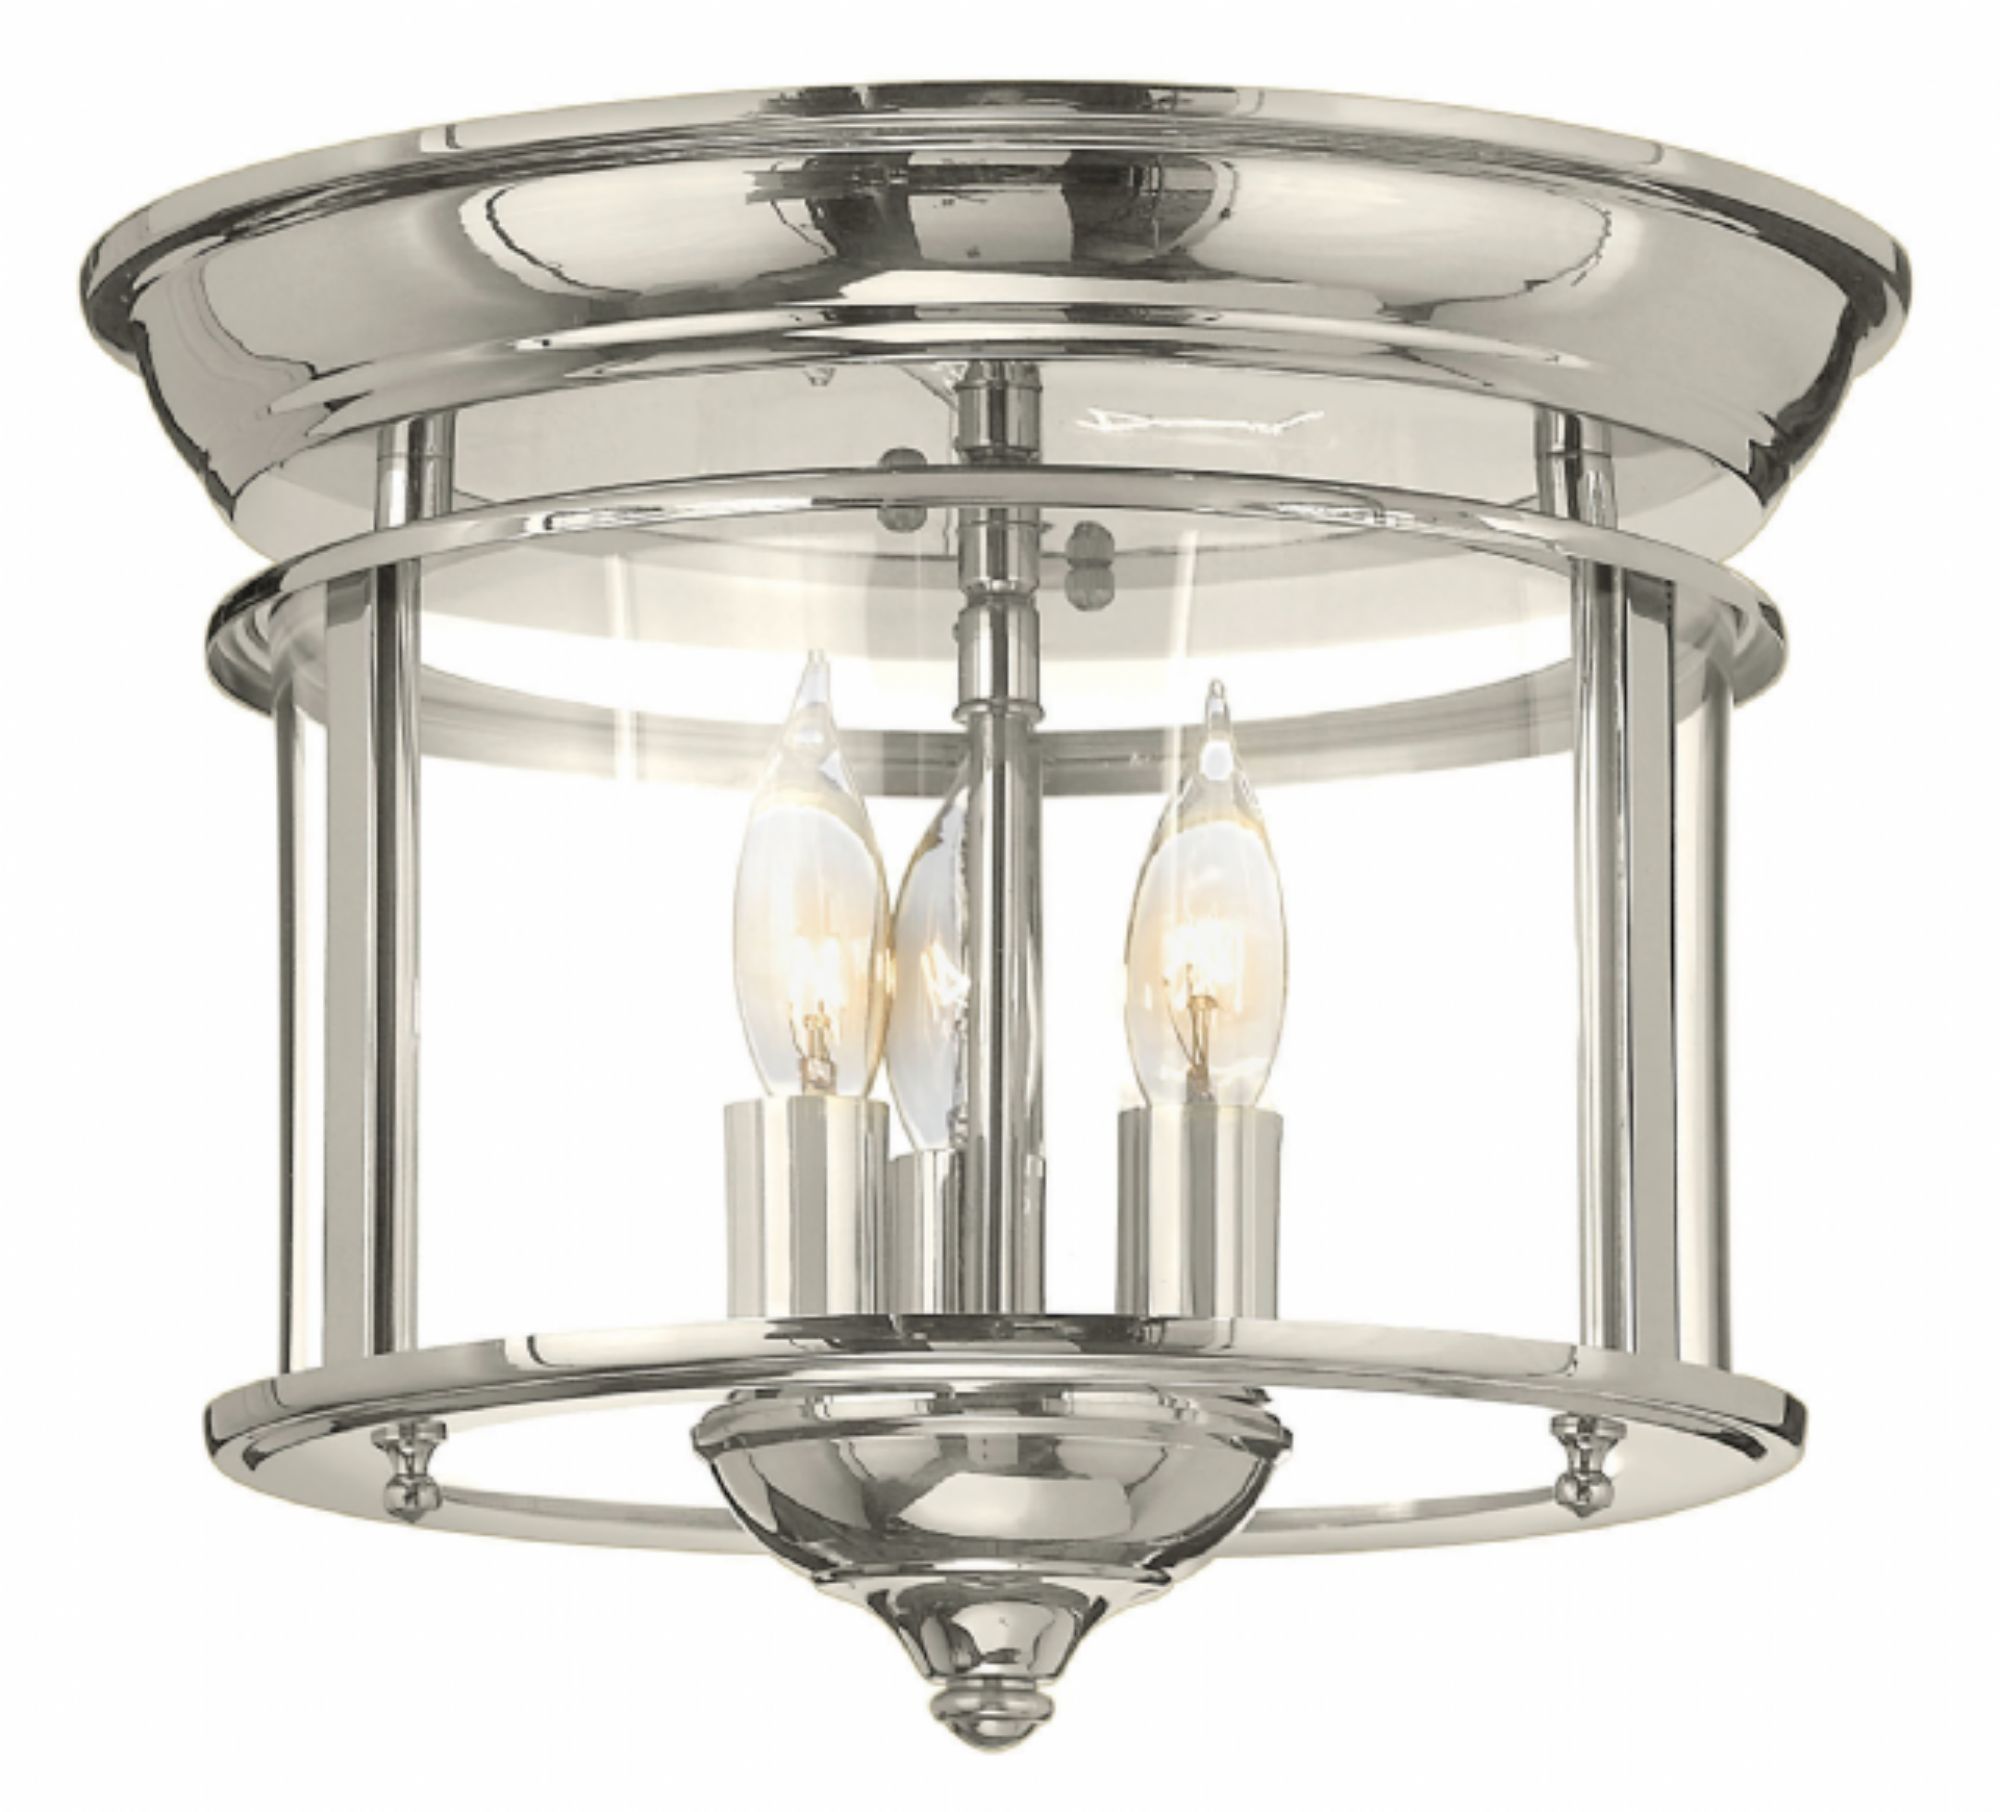 Polished Nickel Gentry > Interior Ceiling Mount Throughout Flush Mount Hinkley Lighting (View 7 of 15)